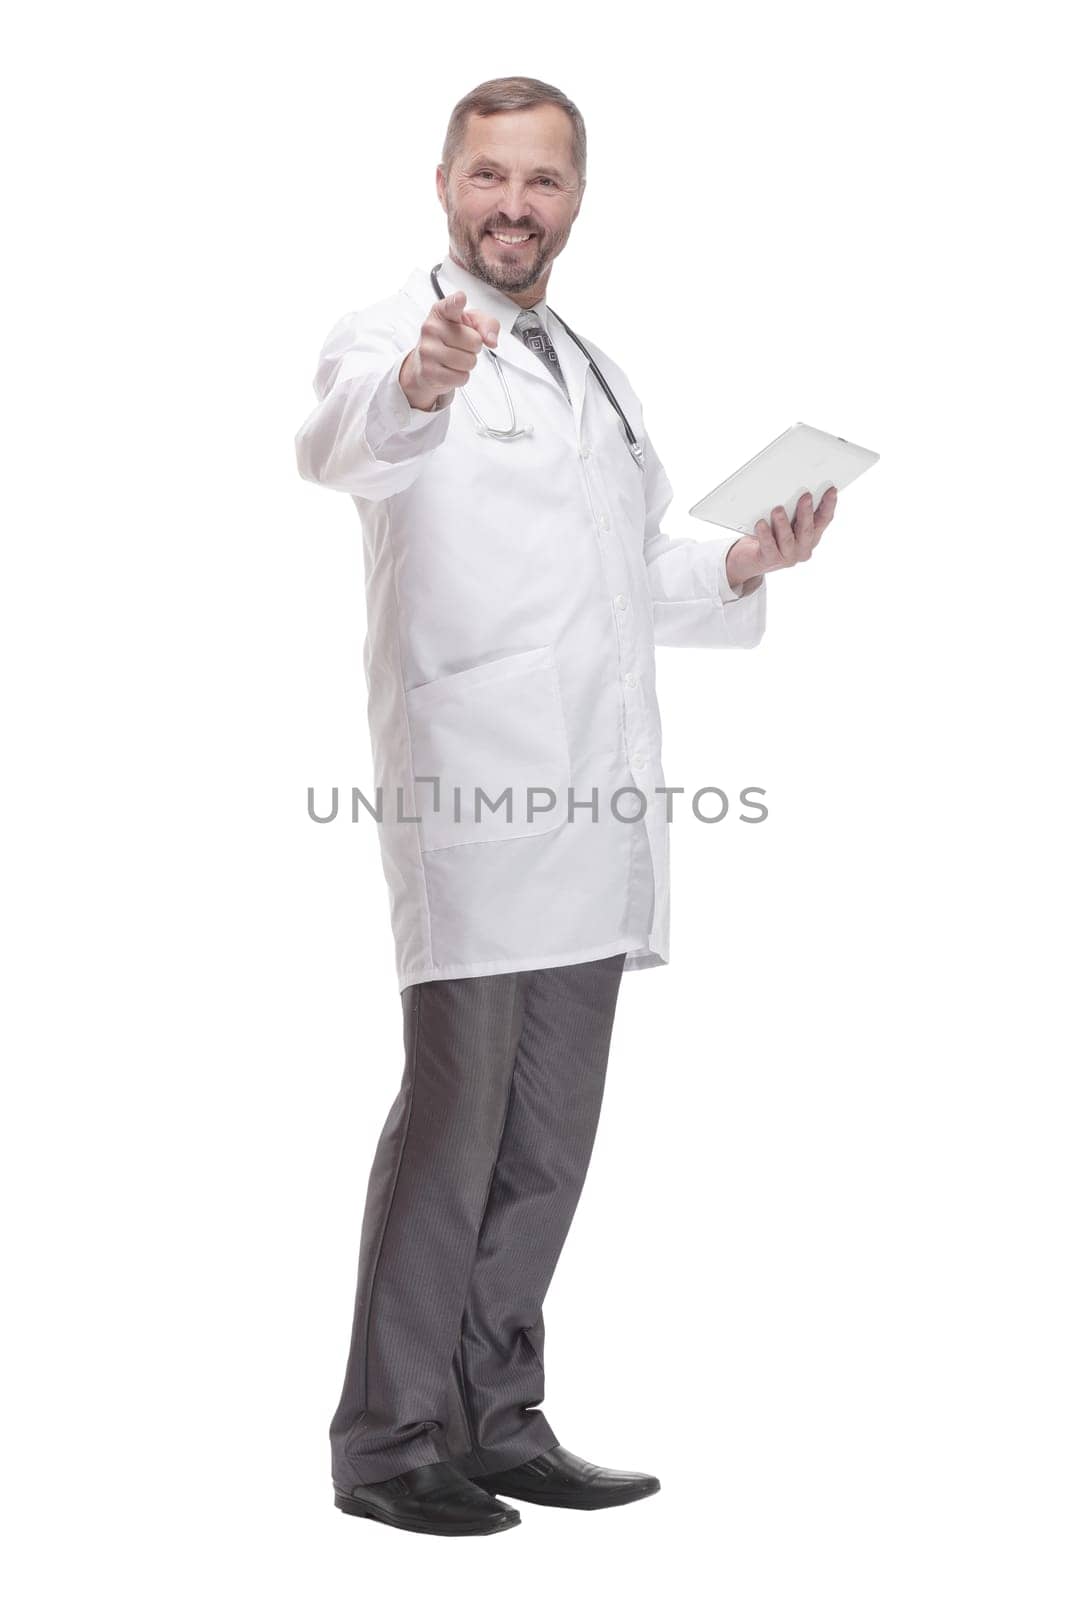 in full growth. smiling doctor with a digital tablet . isolated on a white background.